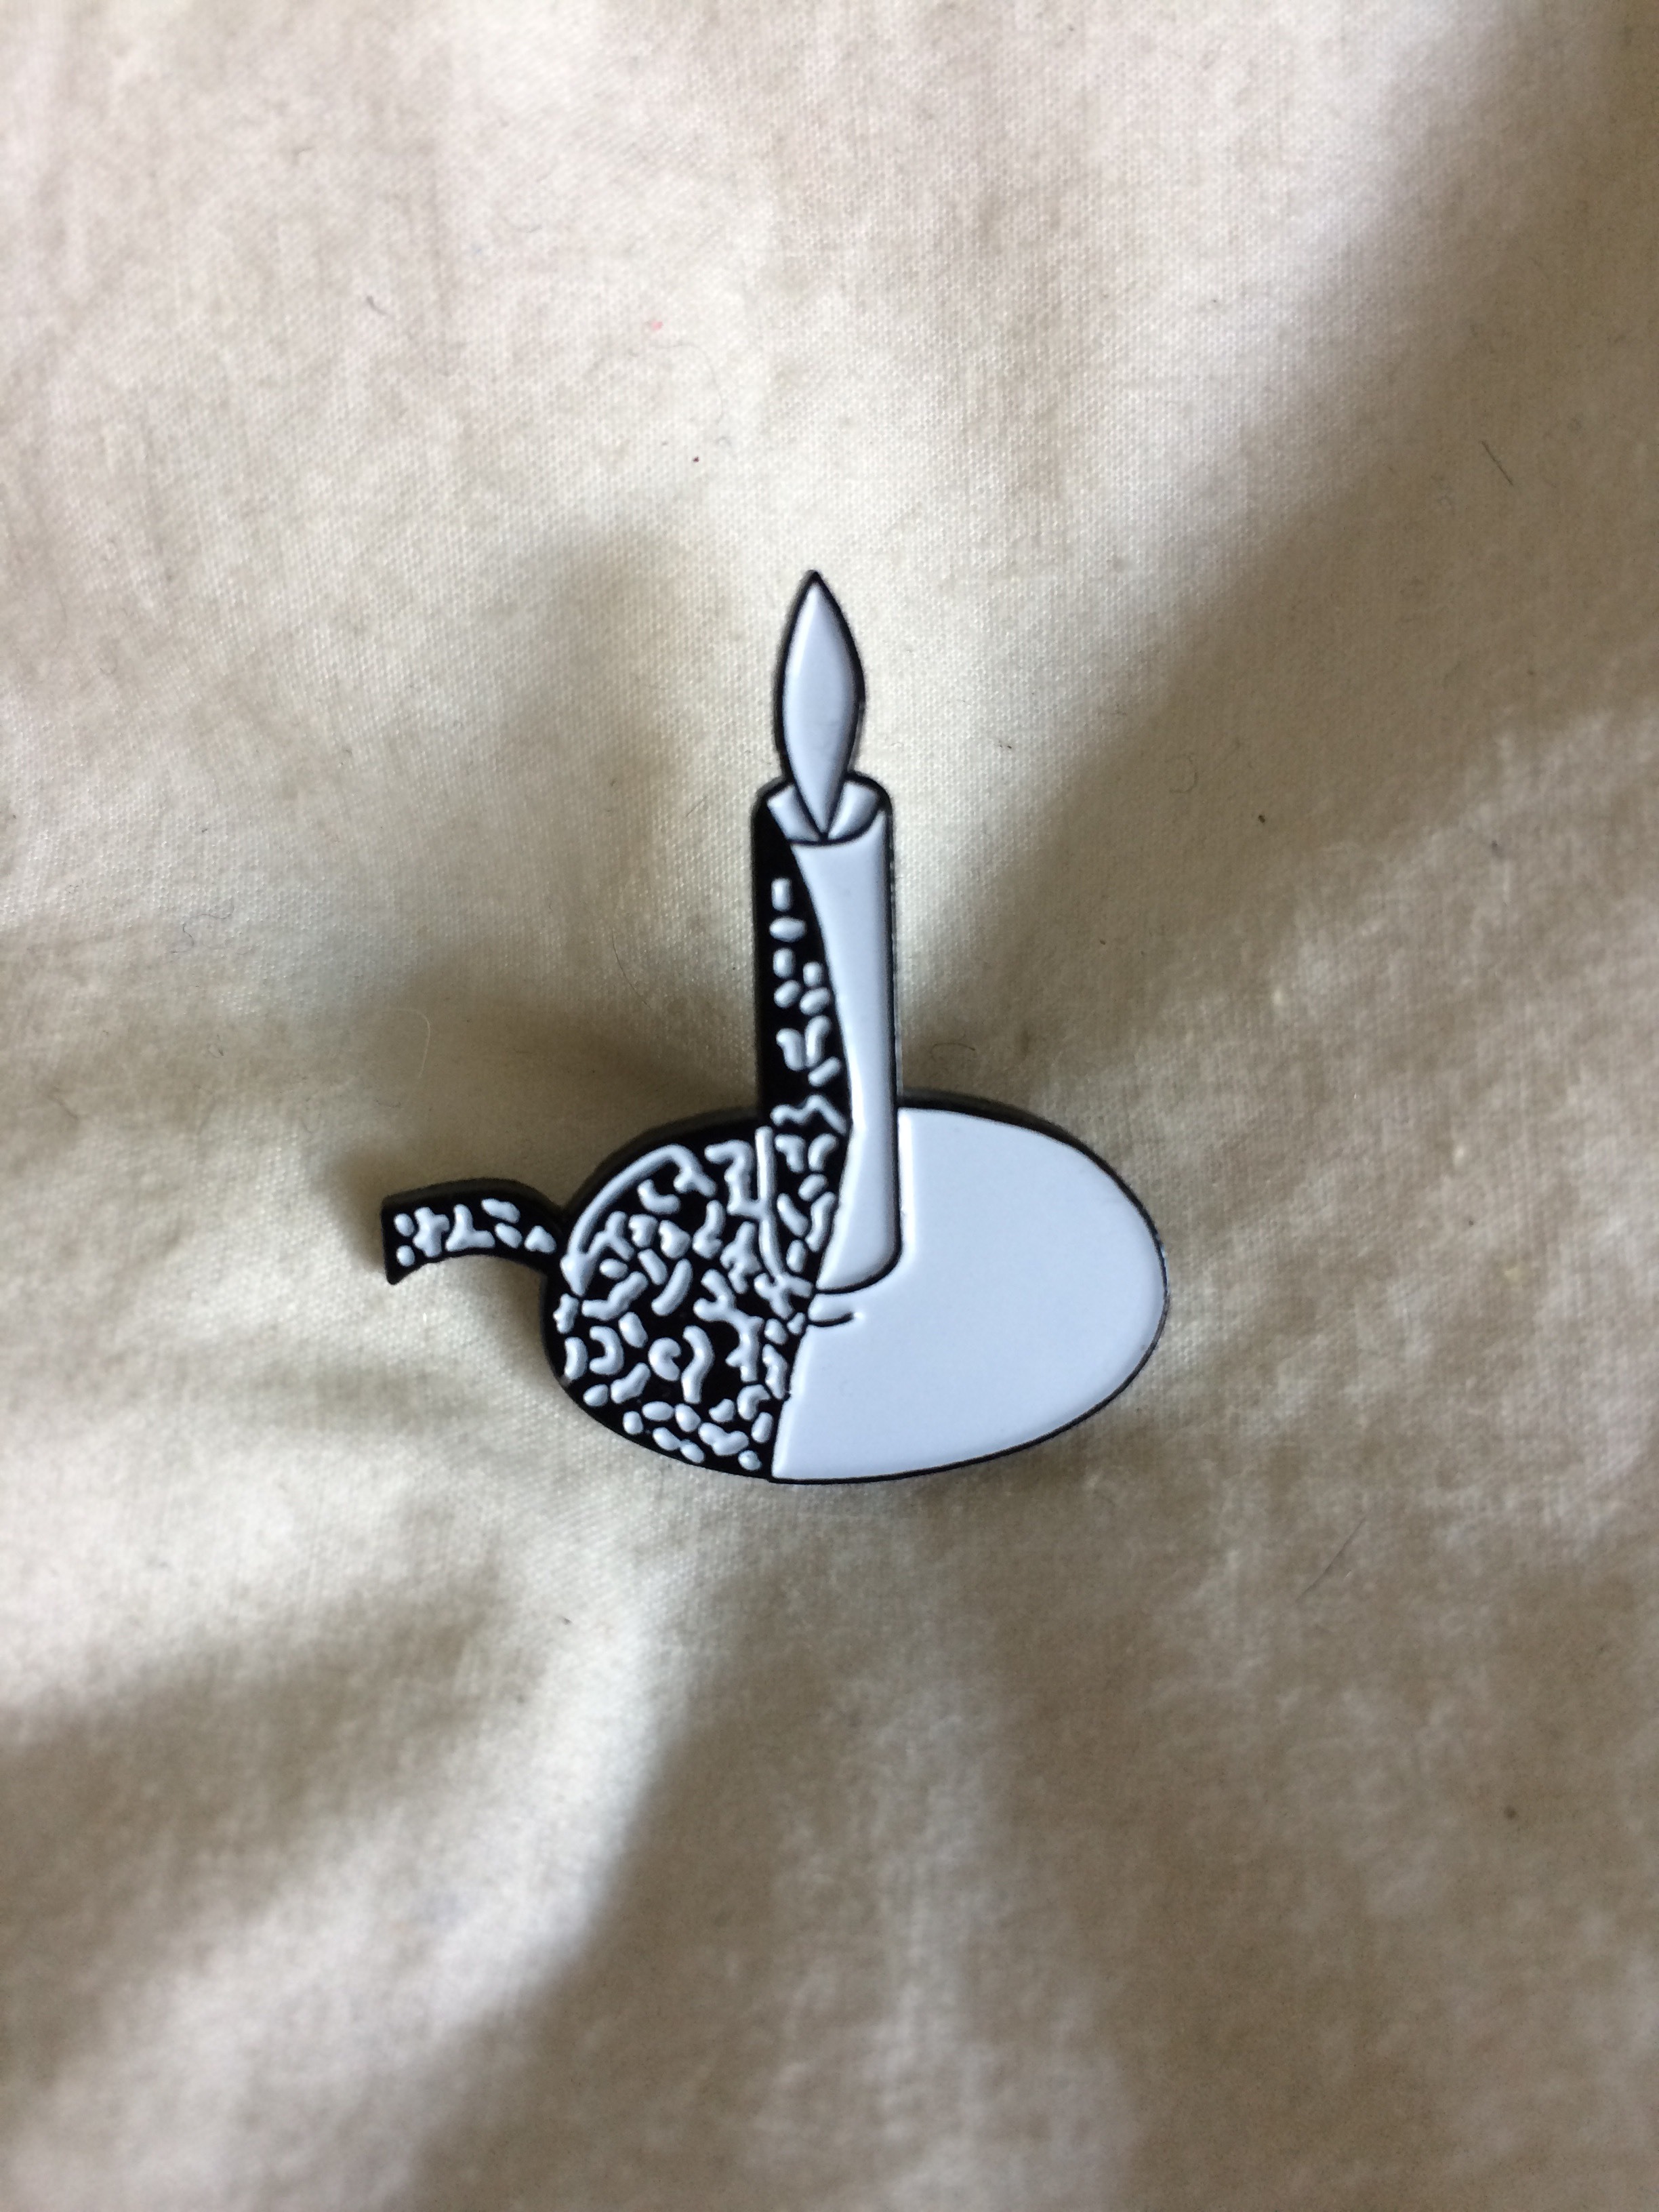  light a candle pin  open edition   2019 